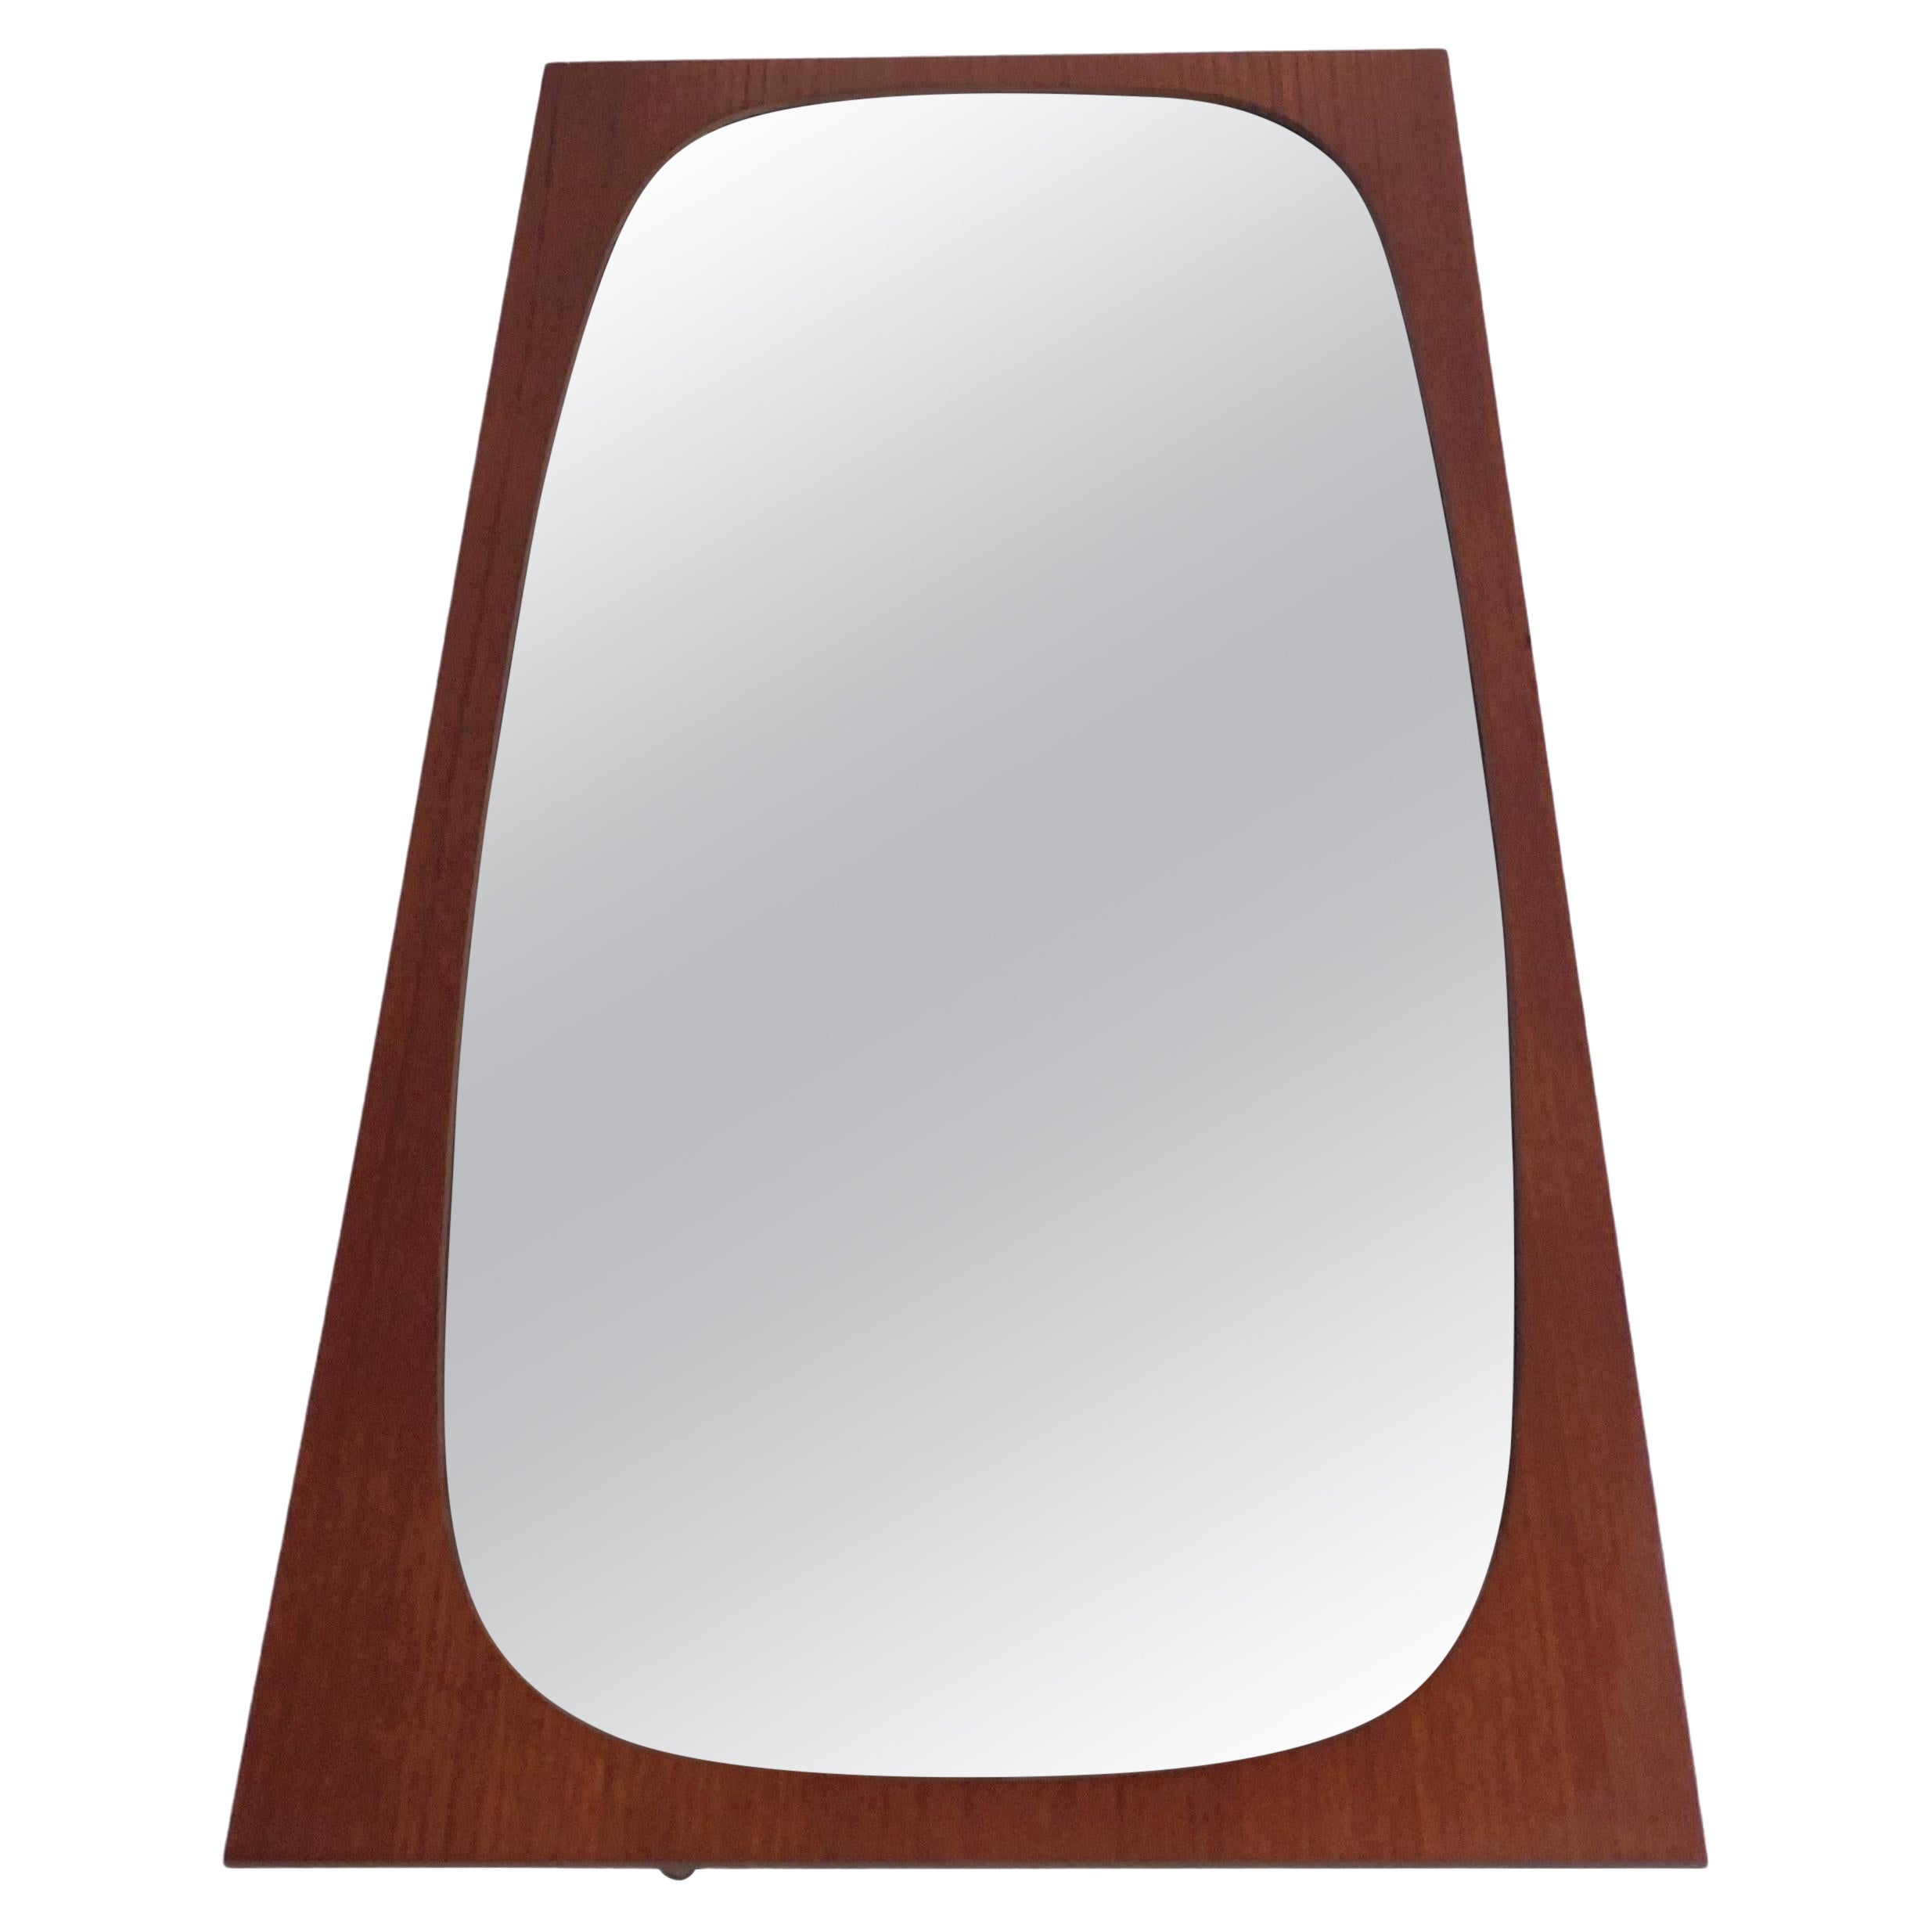 Mid Century Rectangular Teak Plywood Framed Wall Mirror with Oval Glass, 1960s For Sale